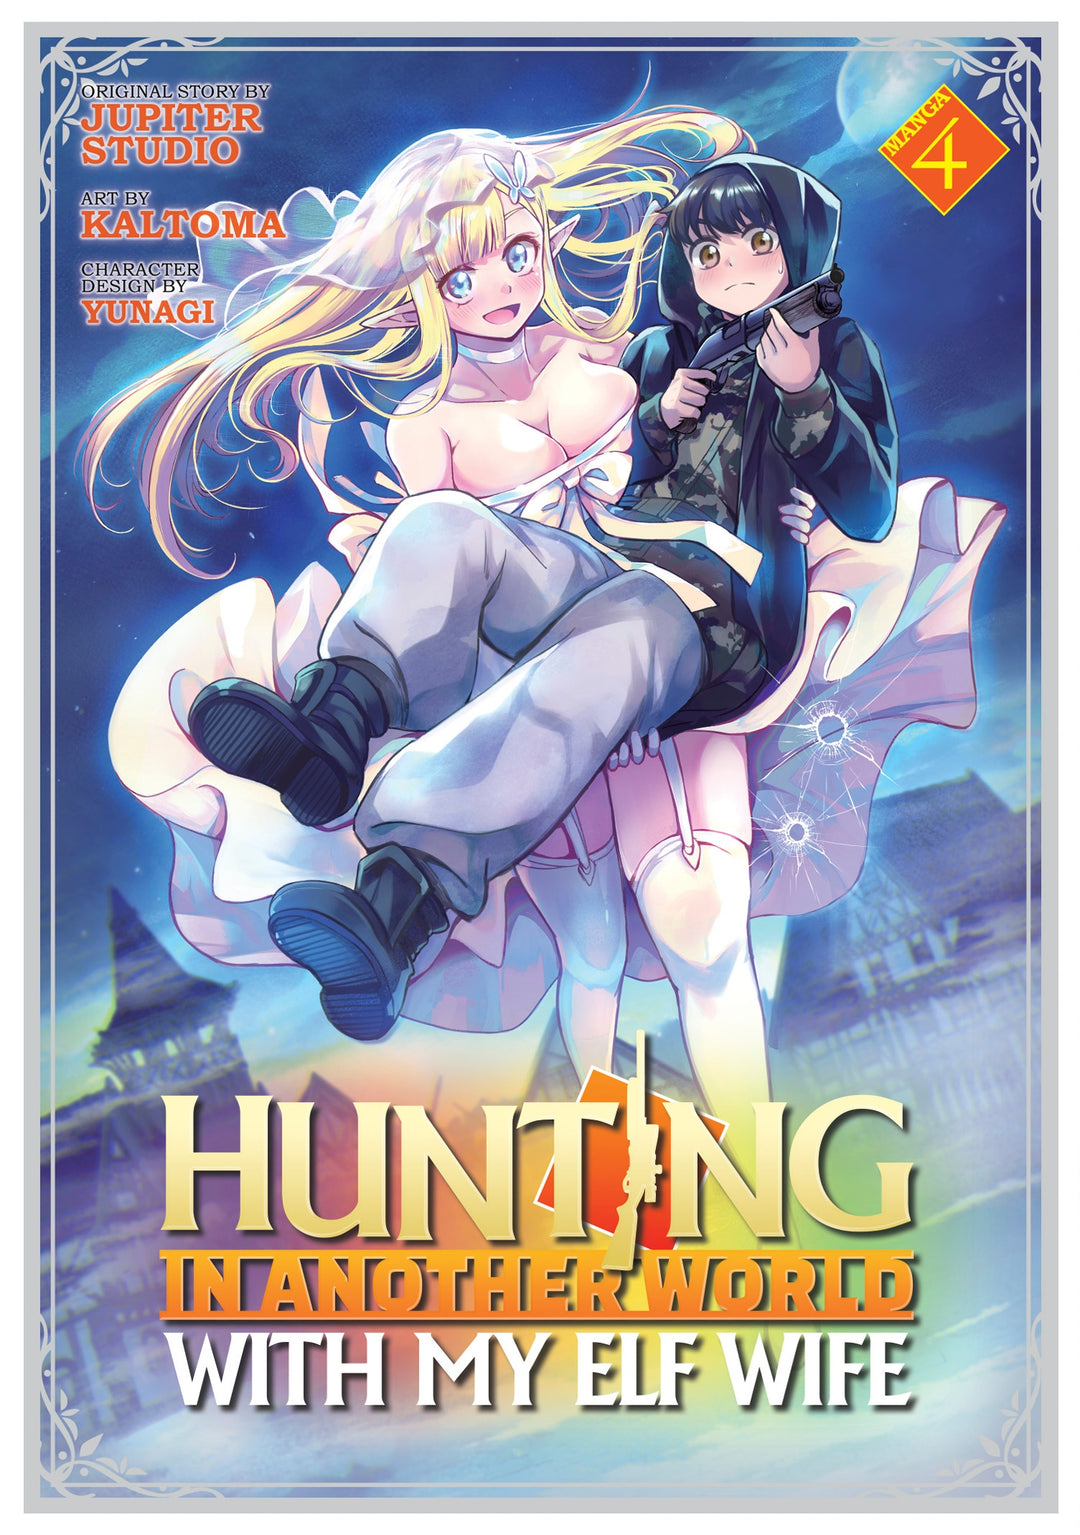 Hunting In Another World With My Elf Wife (Manga), Vol. 04